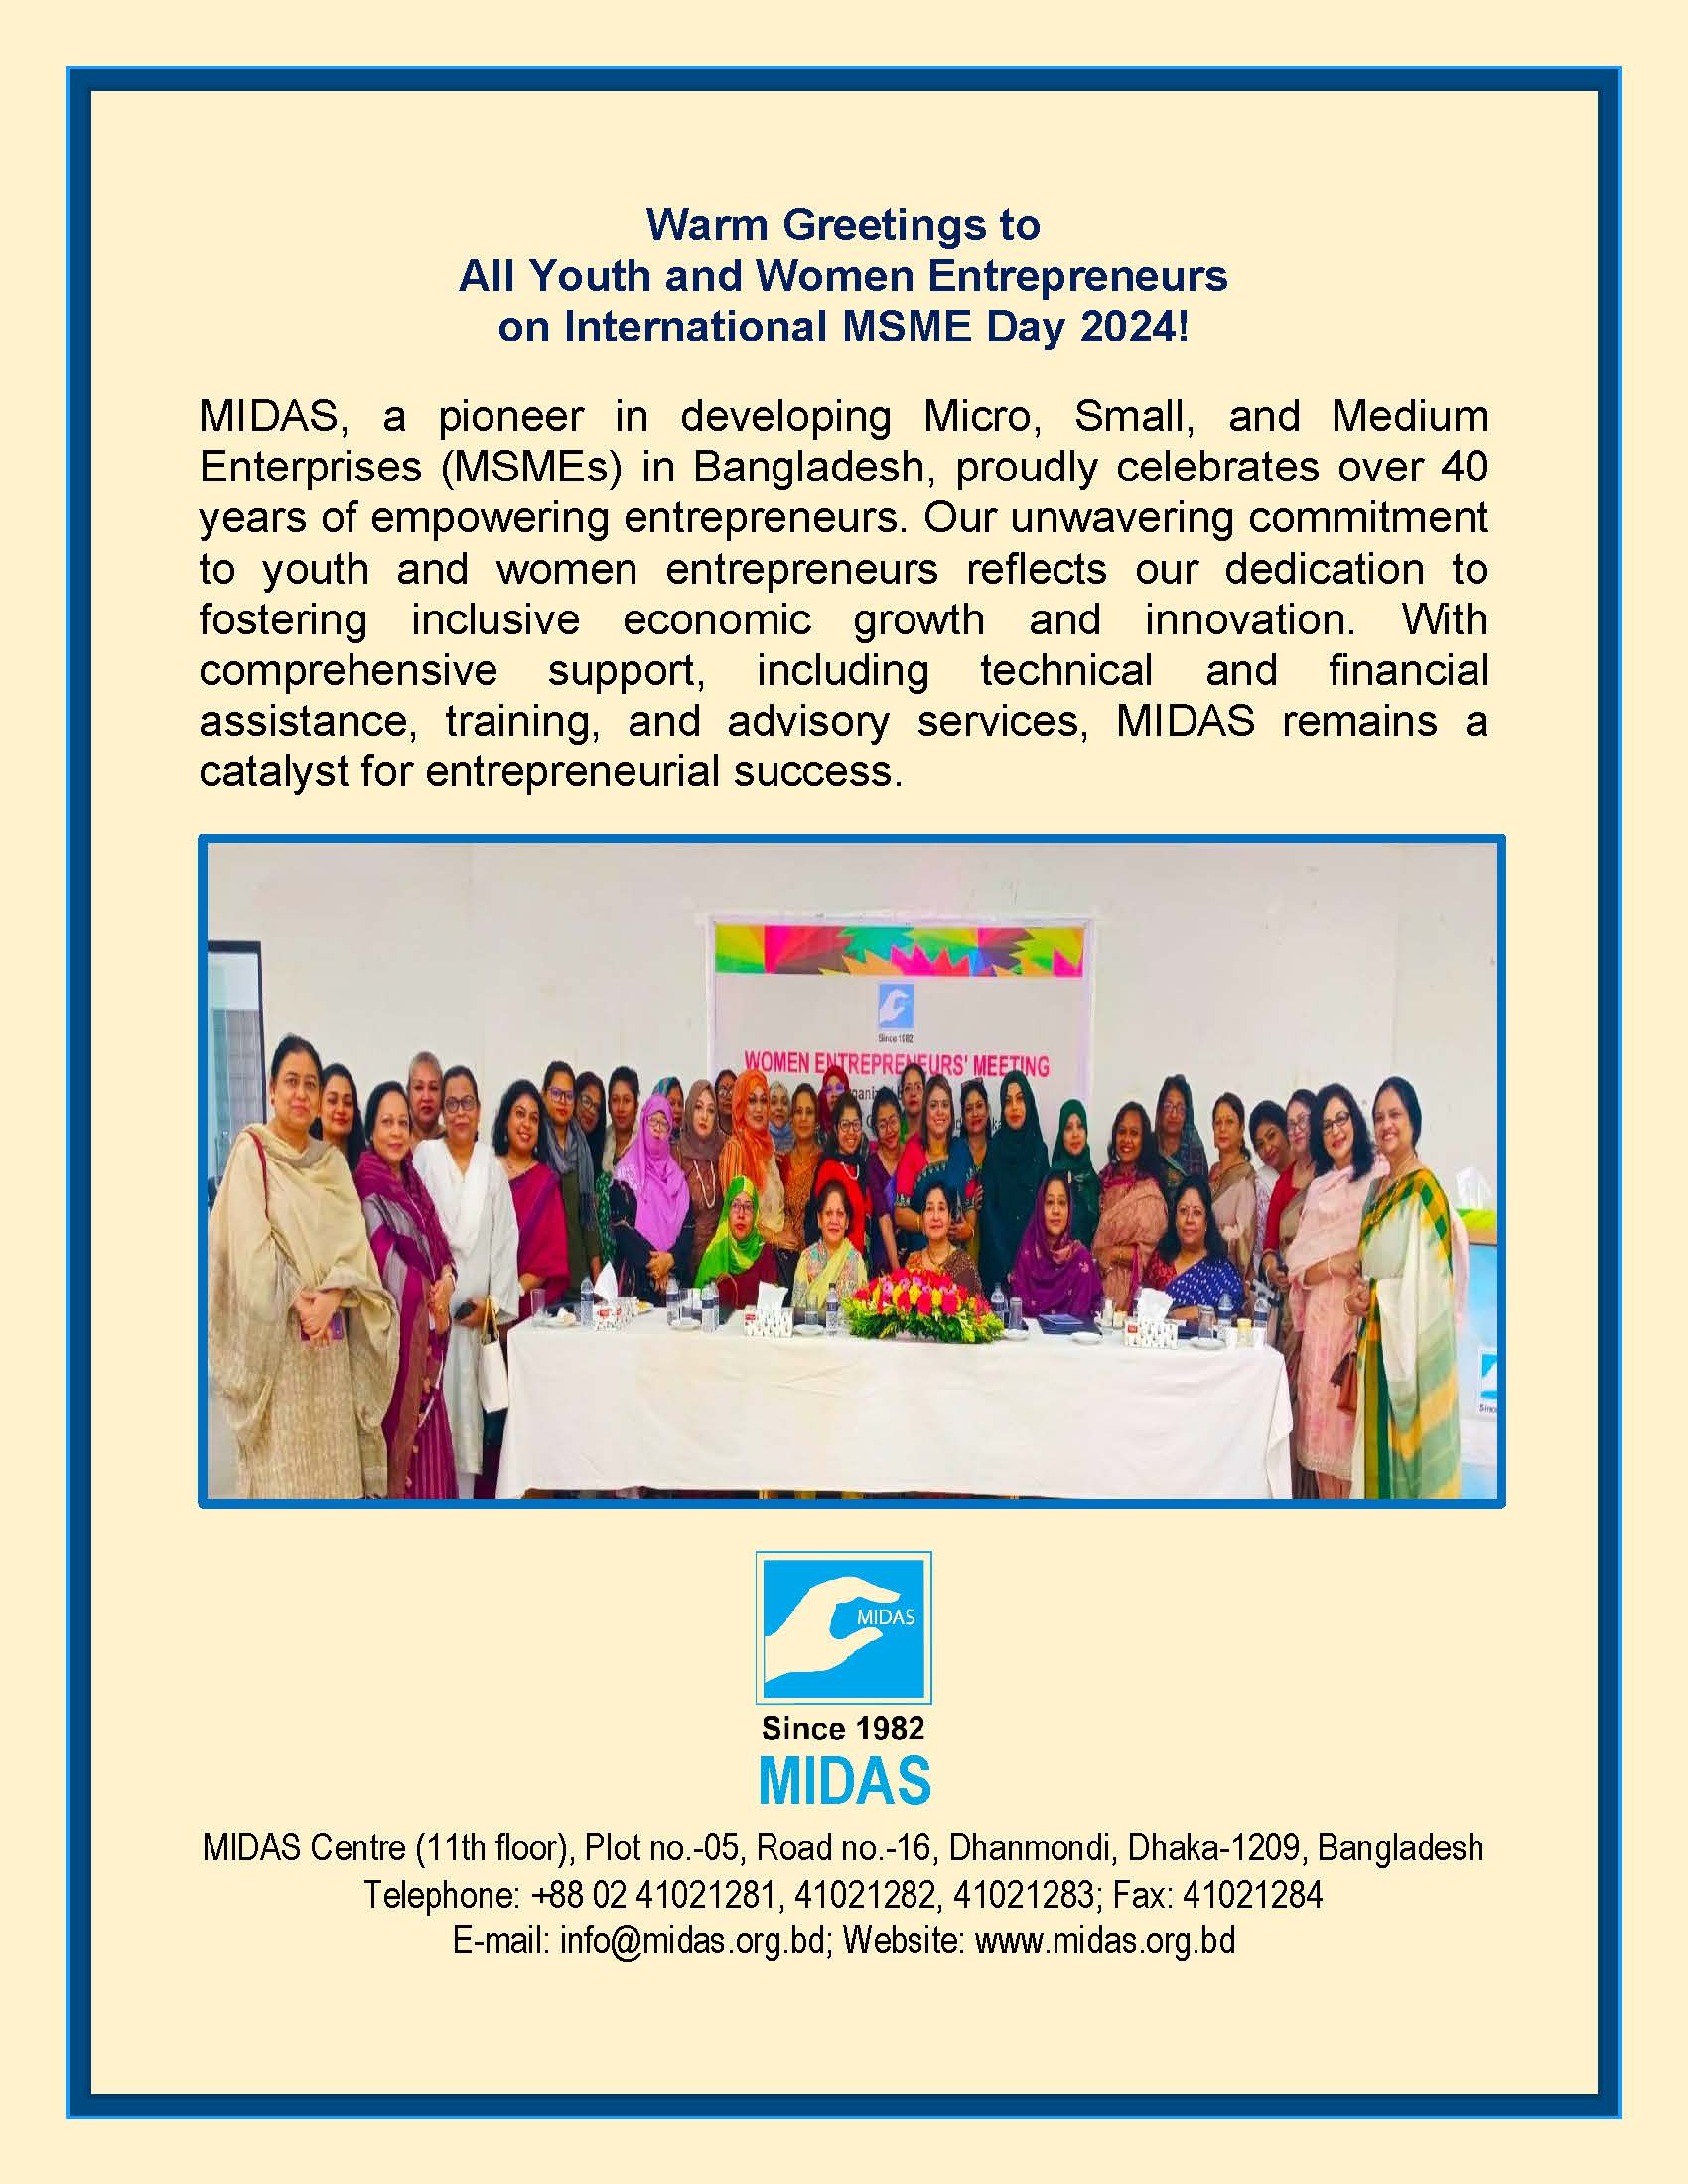 Warm Greetings to All Youth and Women Entrepreneurs on International MSME Day 2024!